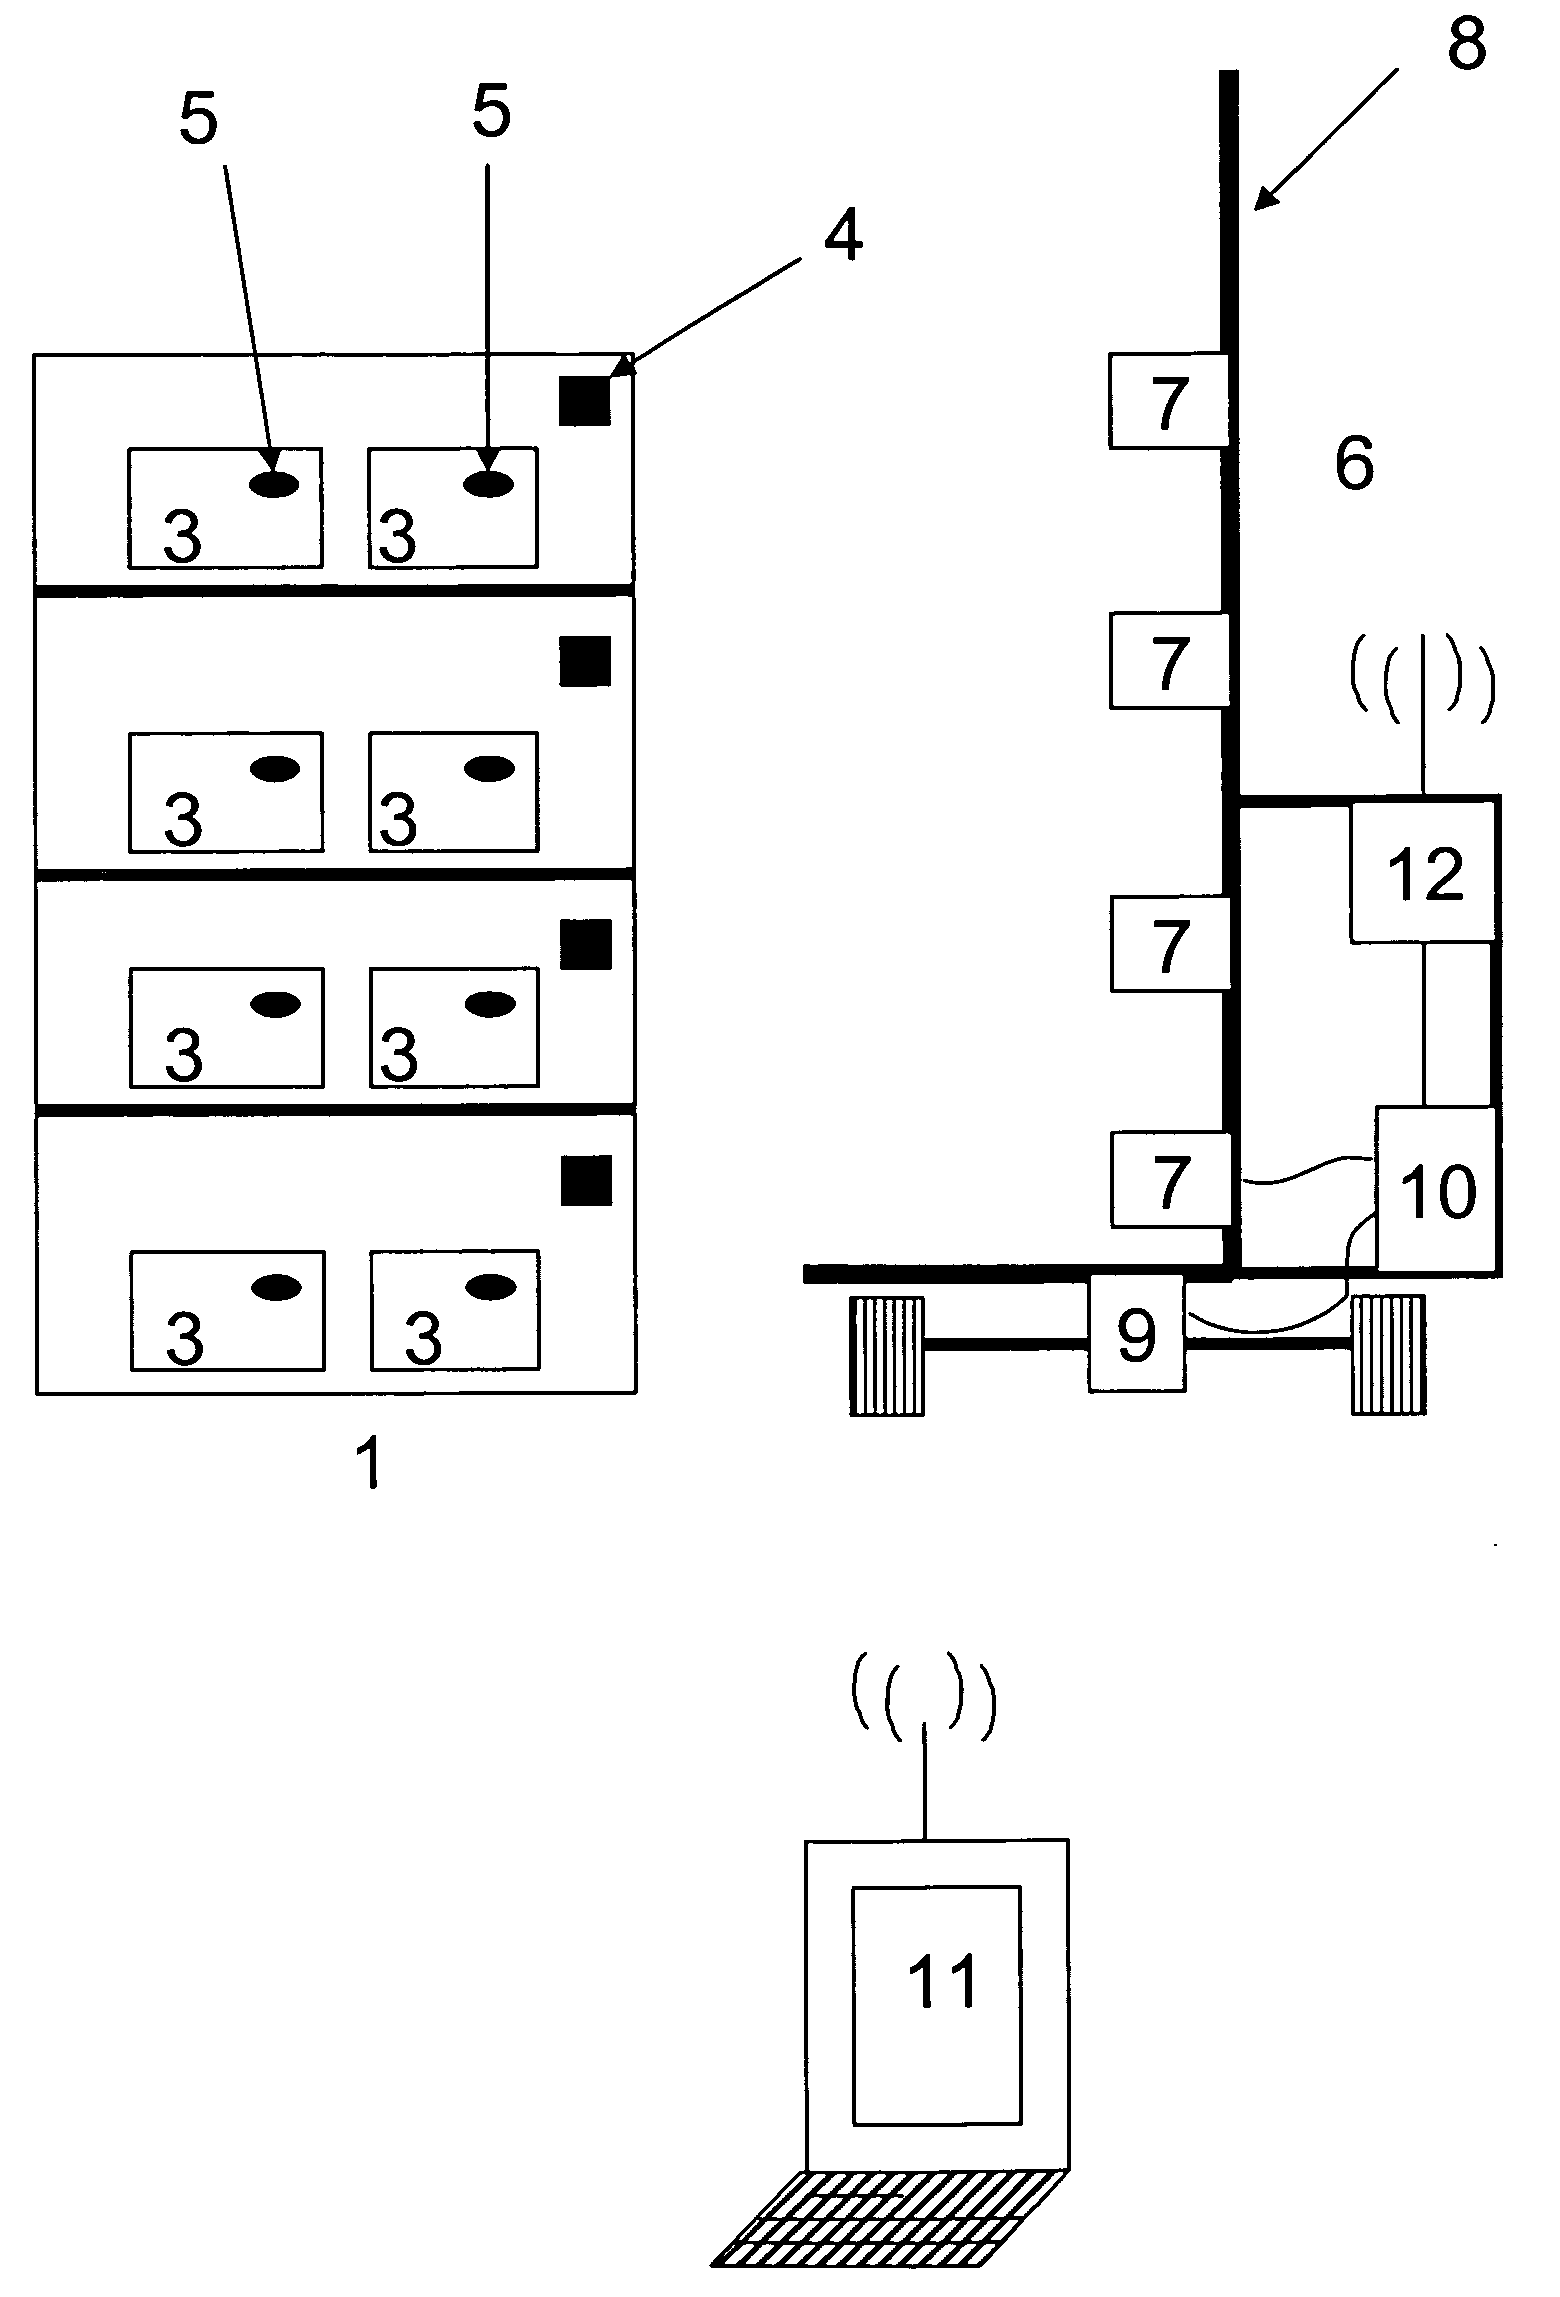 Inventory taking system